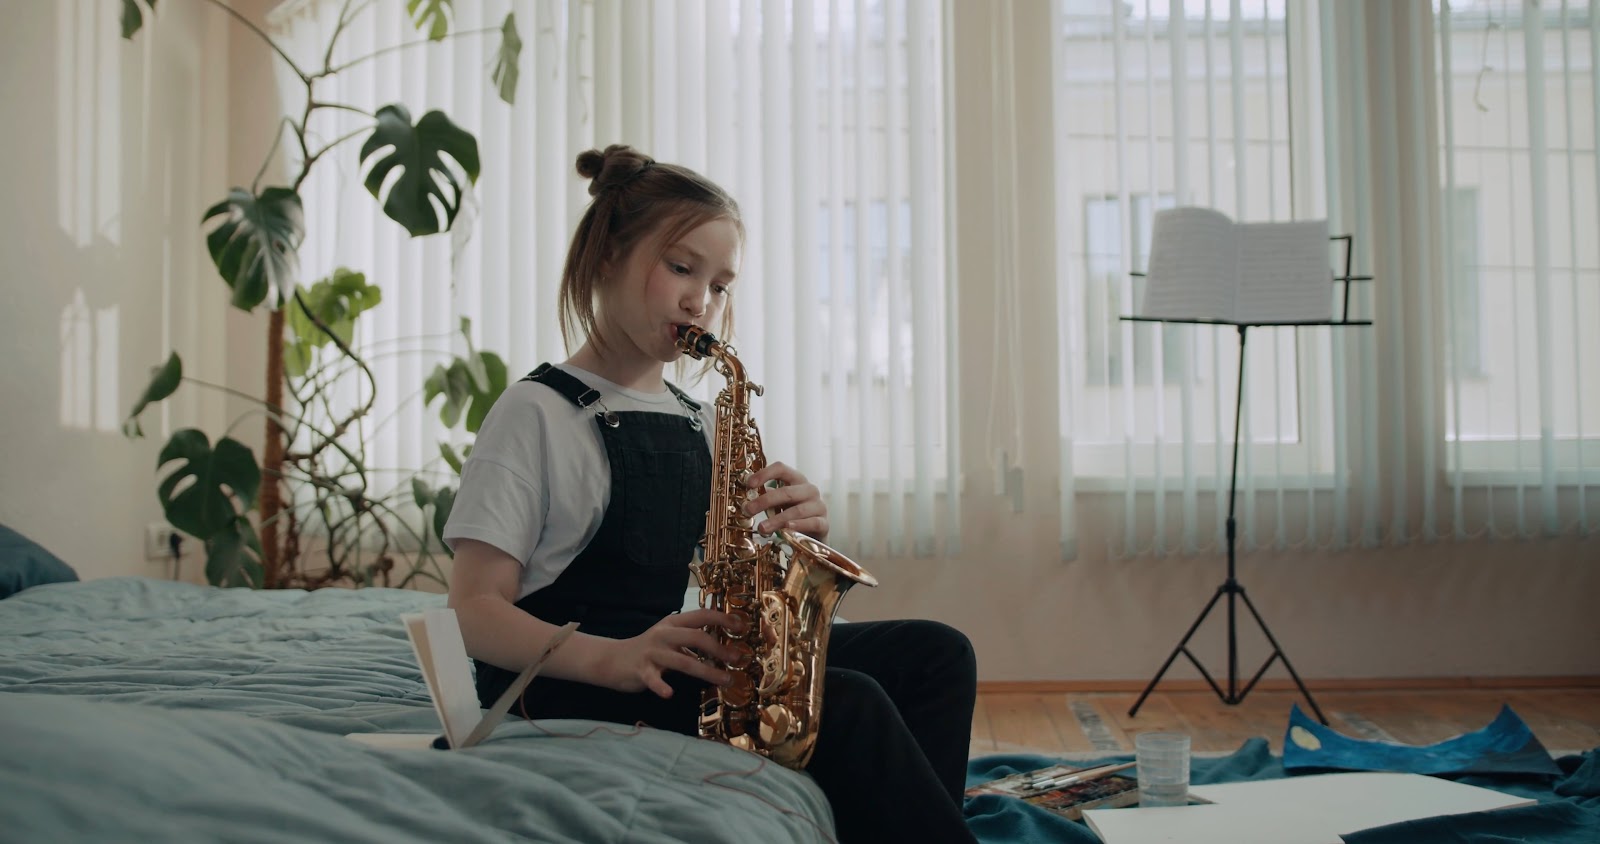 A young girl playing with a Saxophone